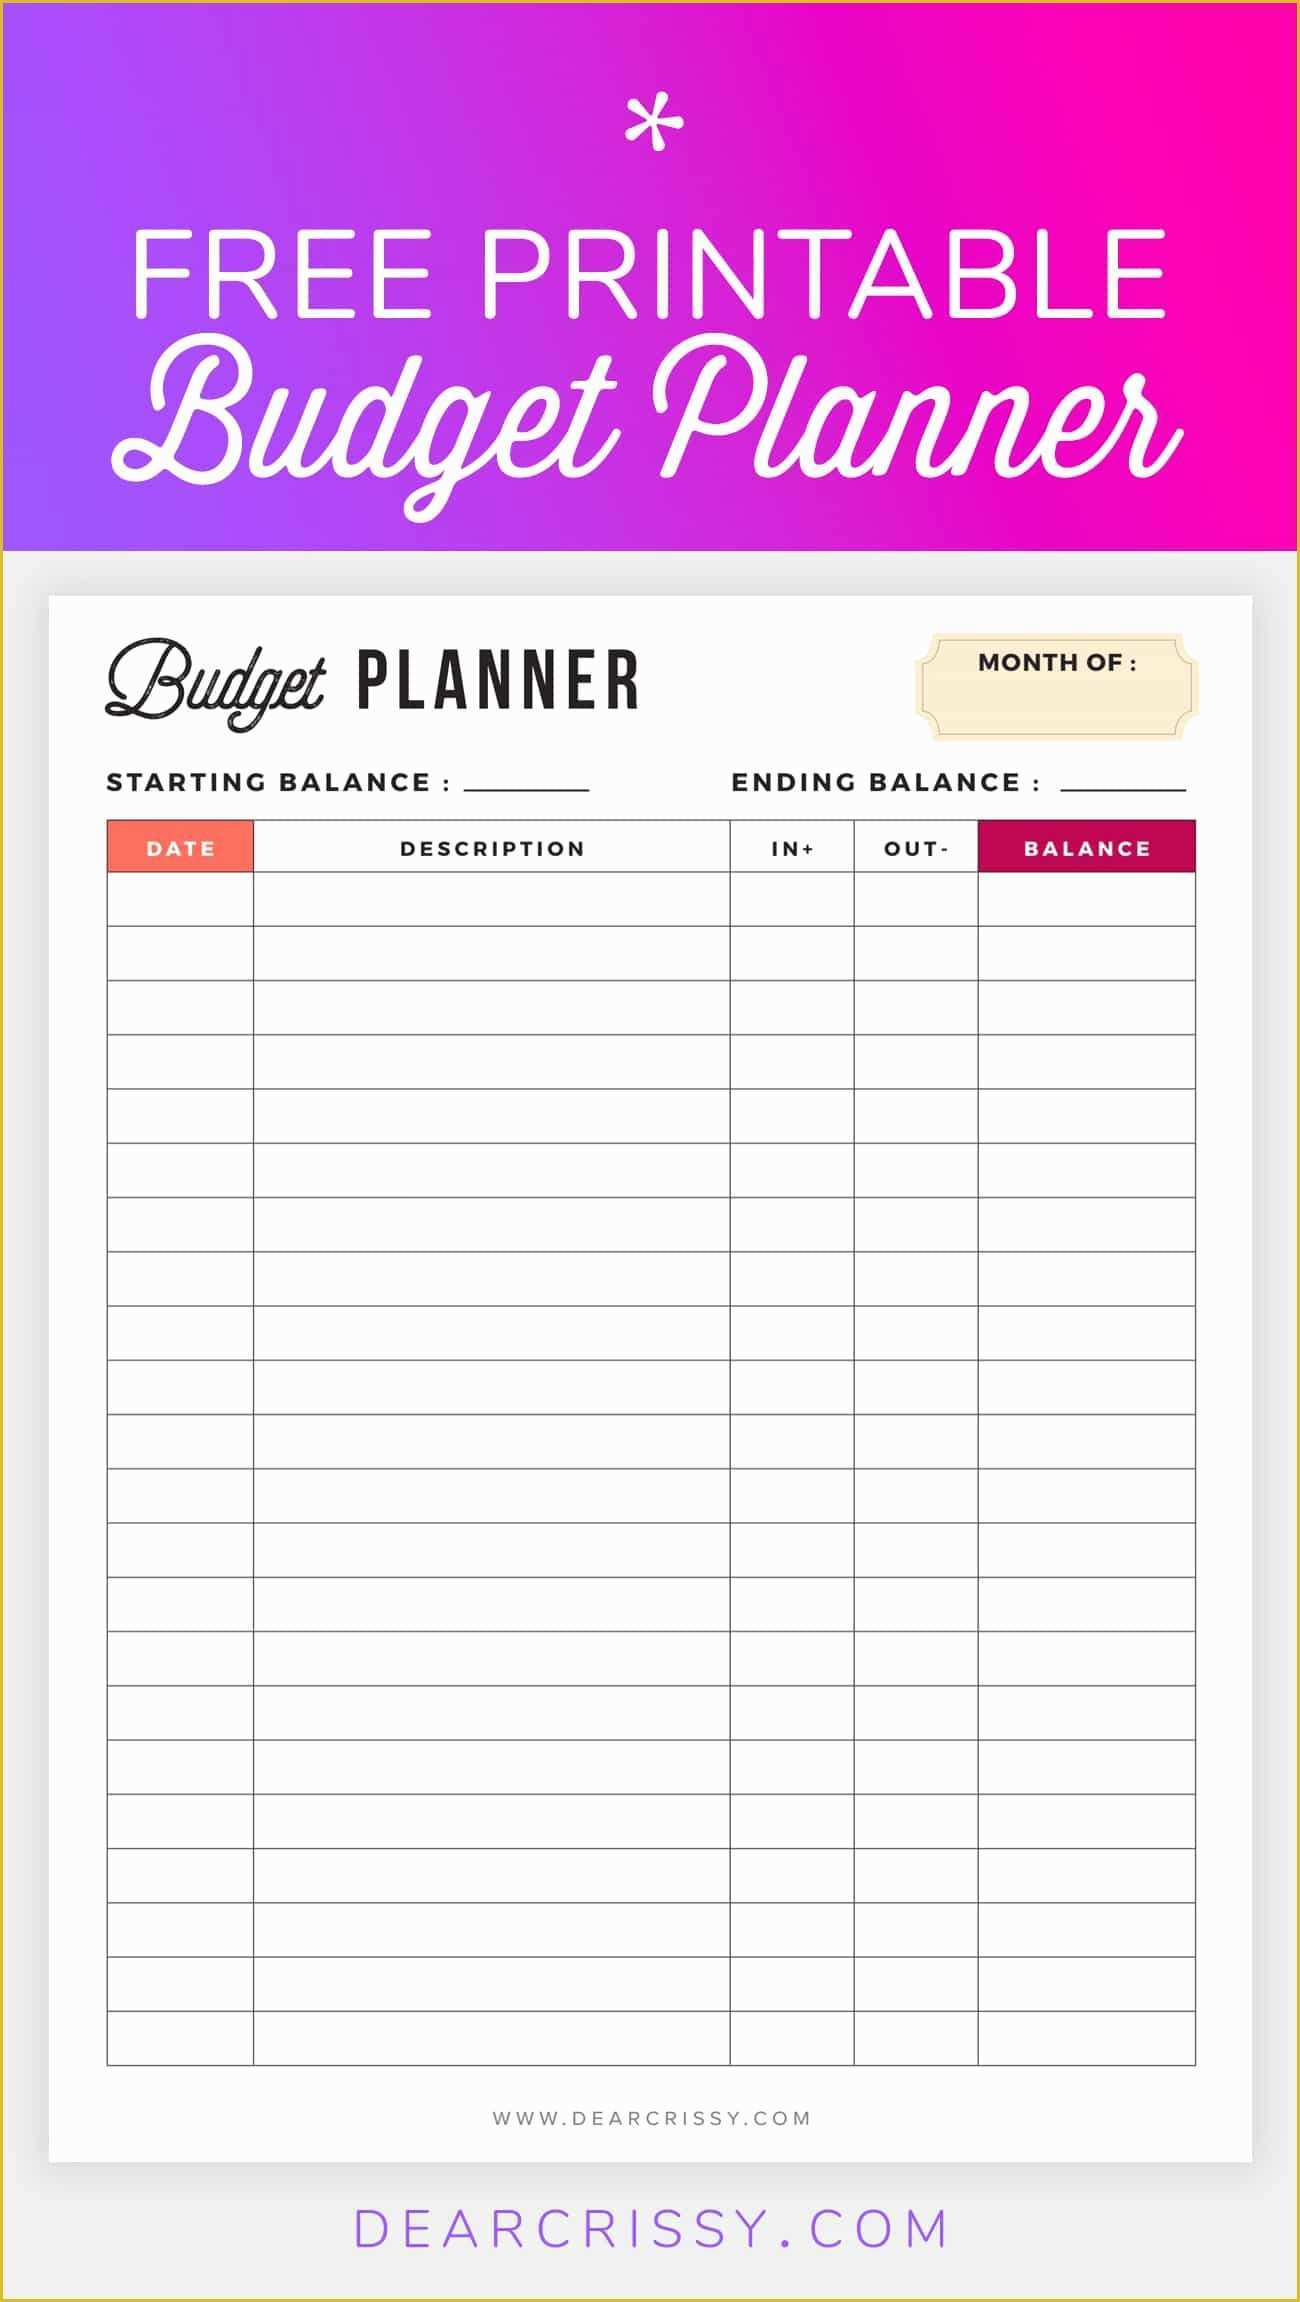 Yearly Budget Planner Template Free Of Free Bud Planner Printable Printable Finance Planner